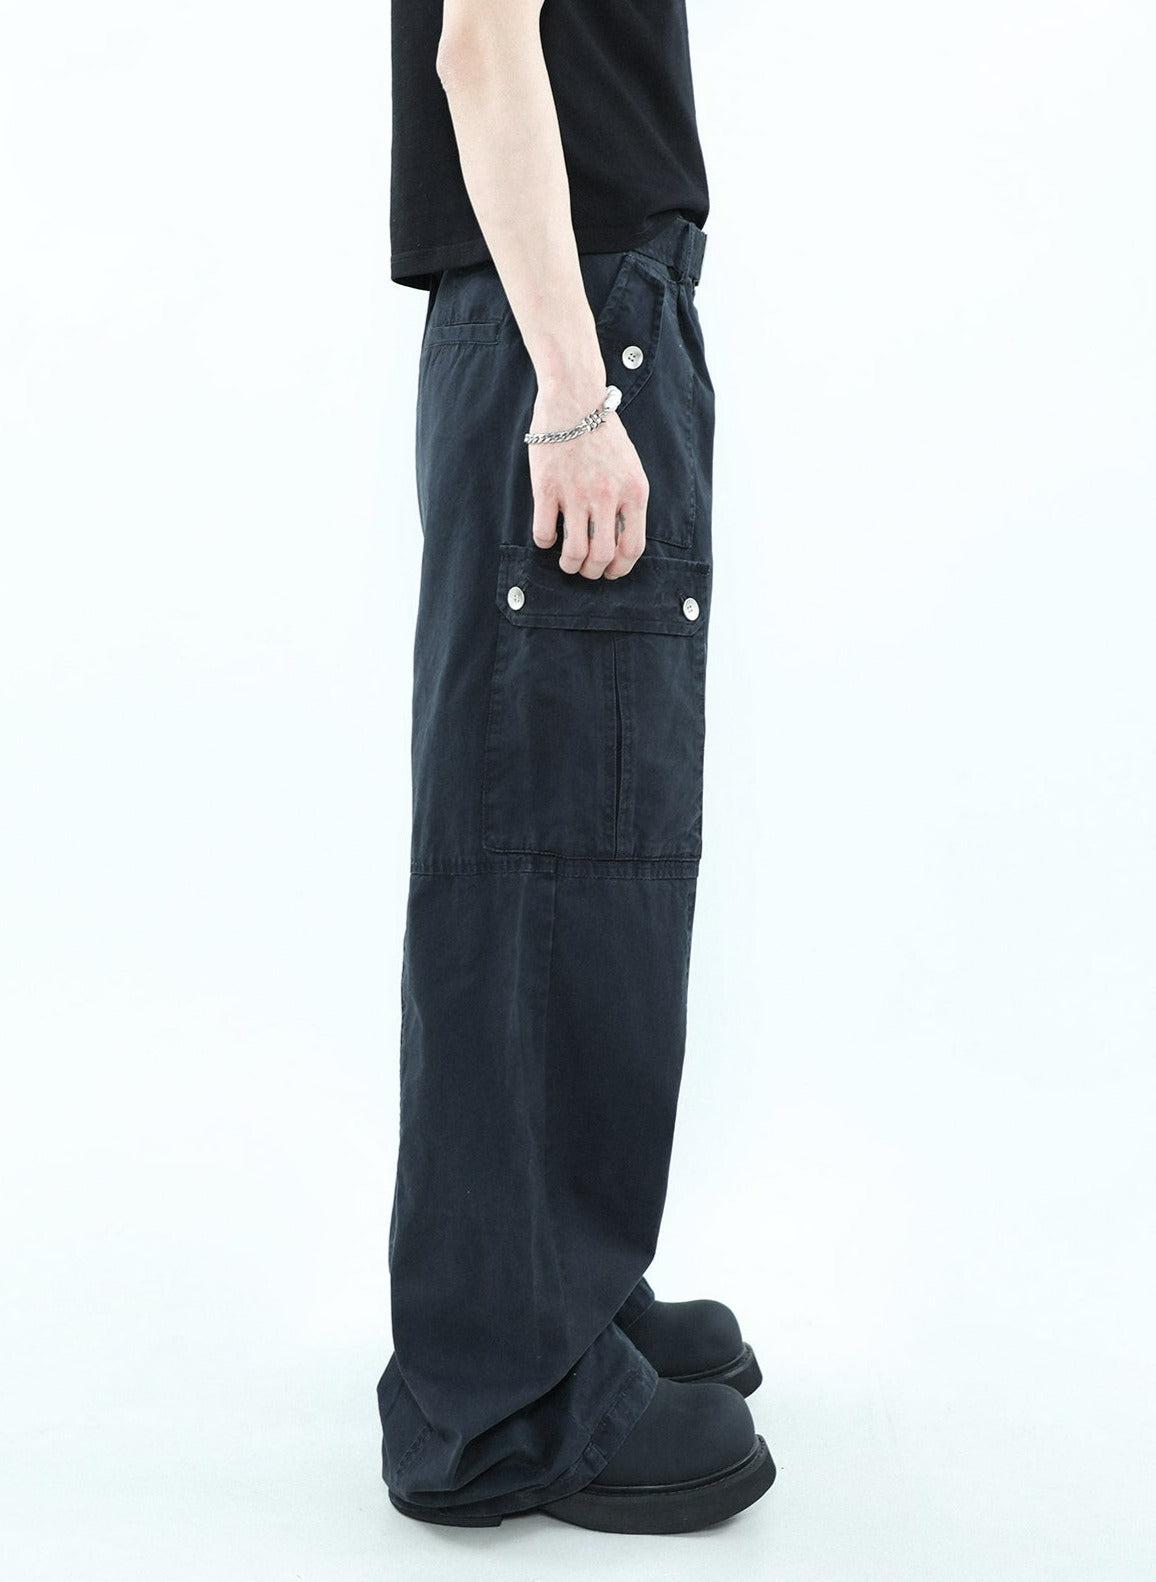 Buckle Belt Cargo Style Pants Korean Street Fashion Pants By Mr Nearly Shop Online at OH Vault